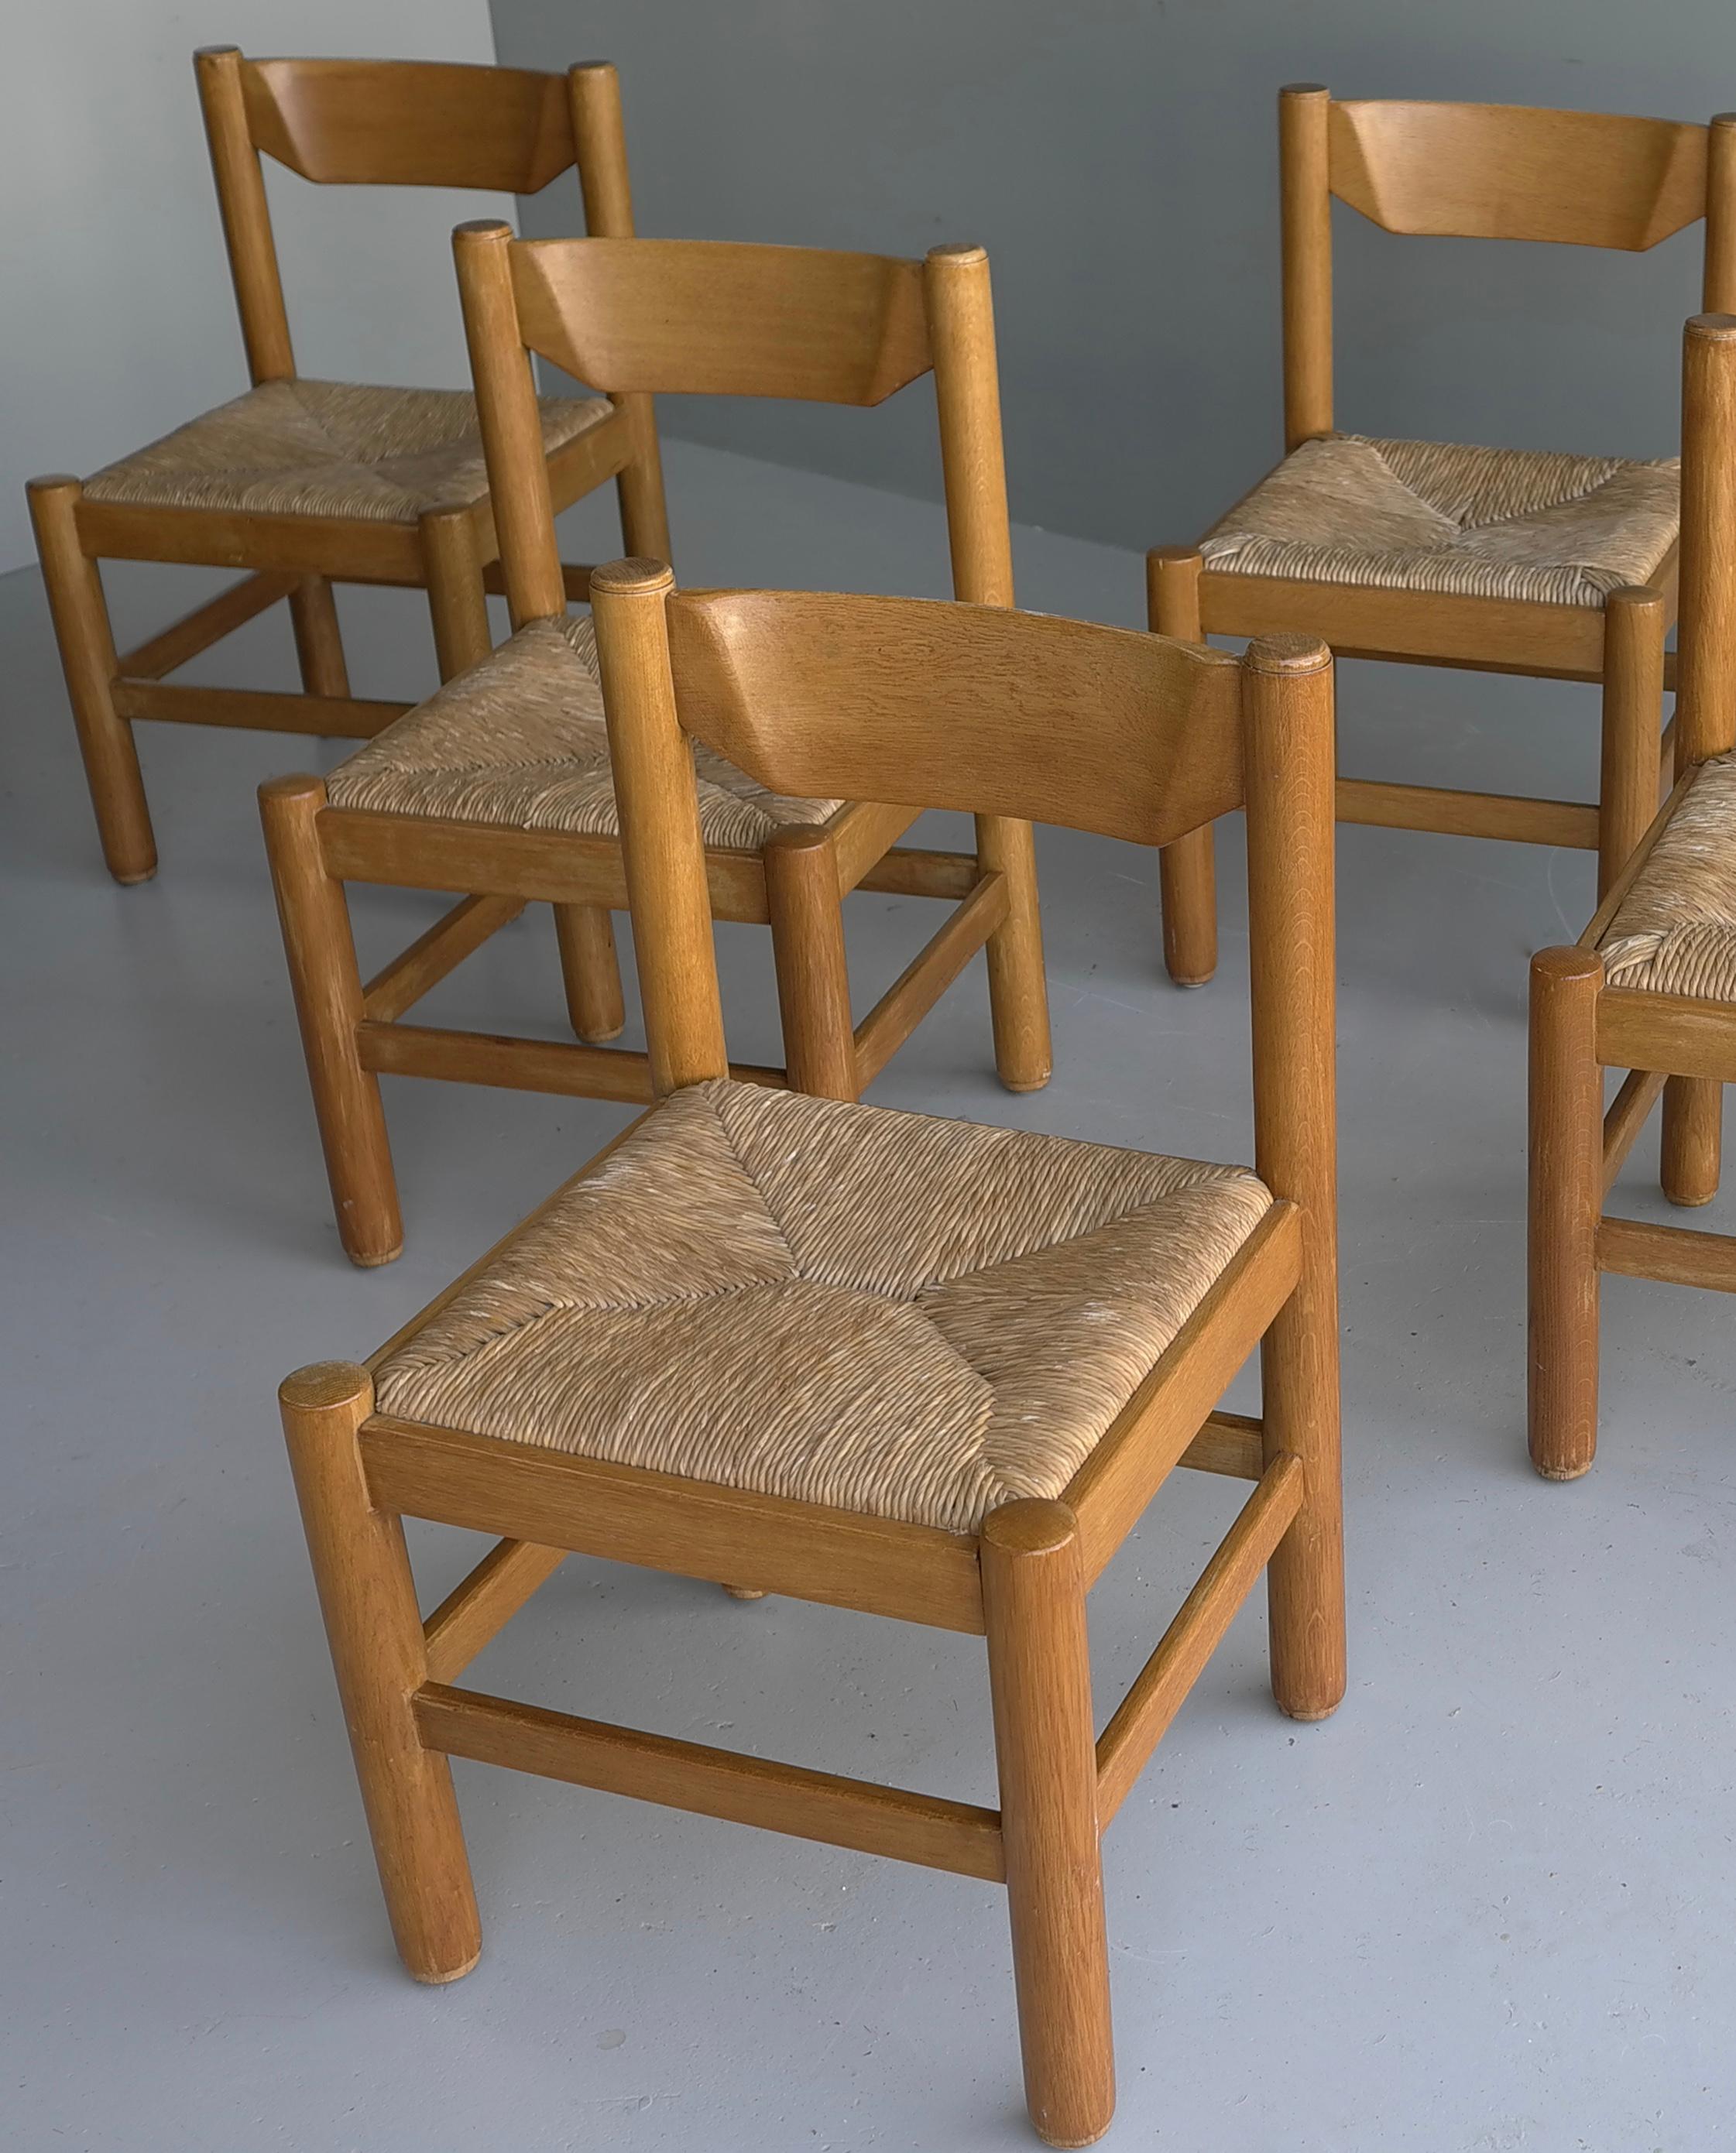 Set of six wooden dining chairs in style of Charlotte Perriand, France, 1960
Solid heavy oak chairs with rush seats.